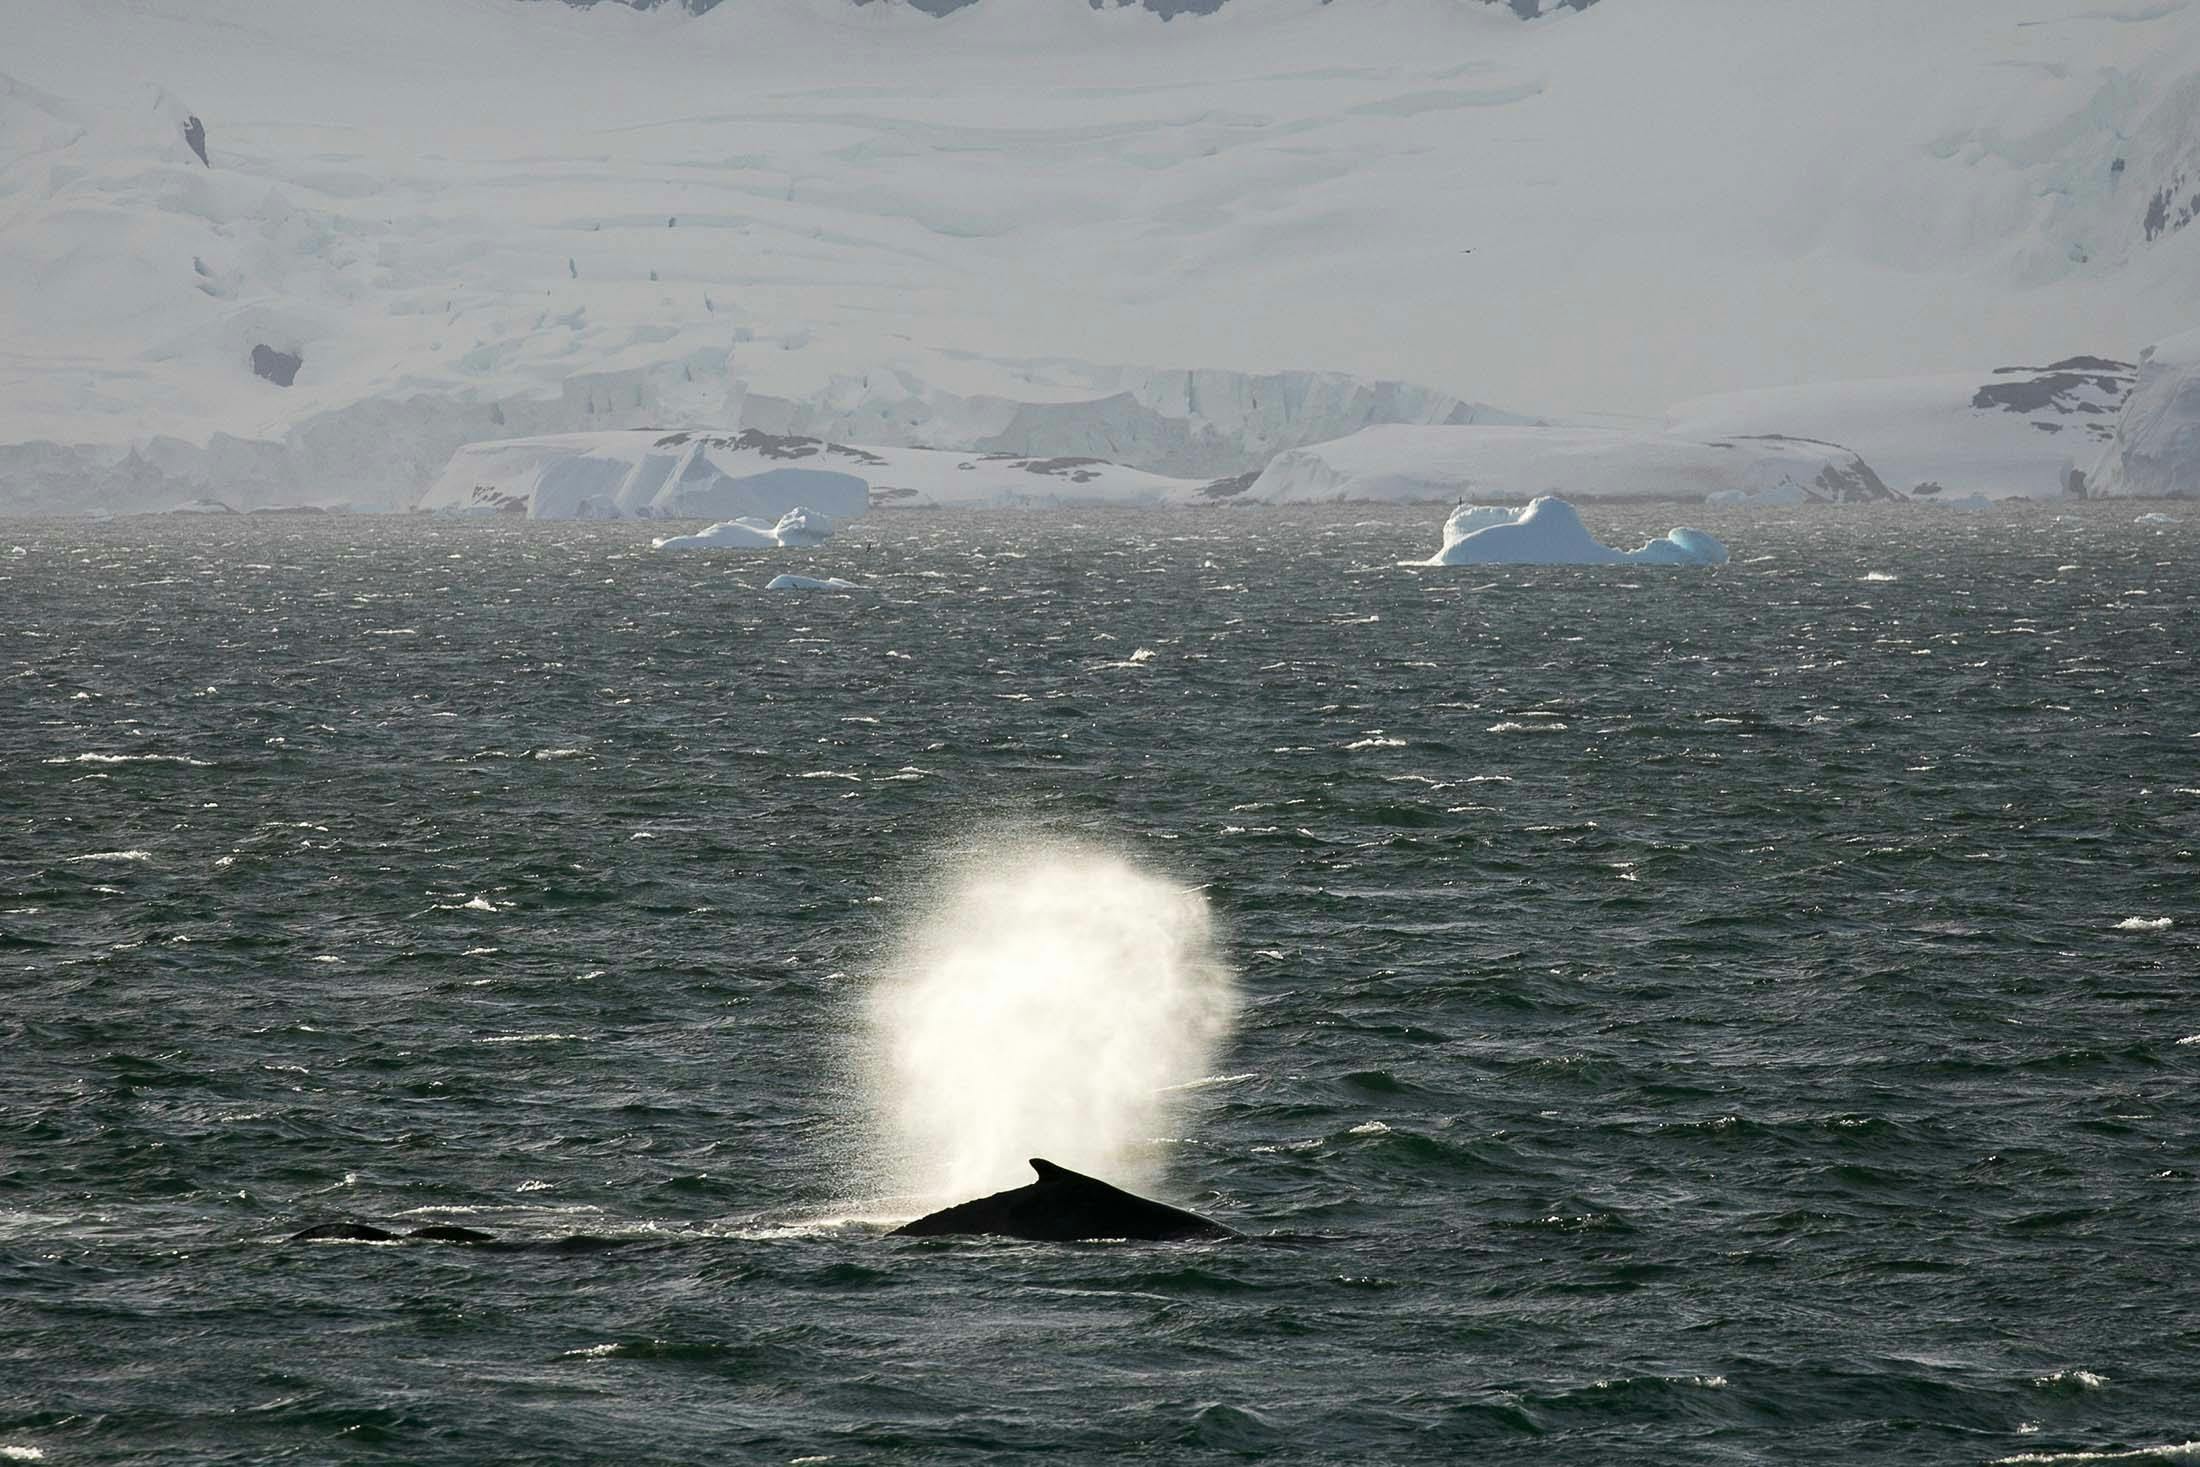 Seeing humpback whales in the Antarctic Sound is one reason to visit Antarctica with Silversea